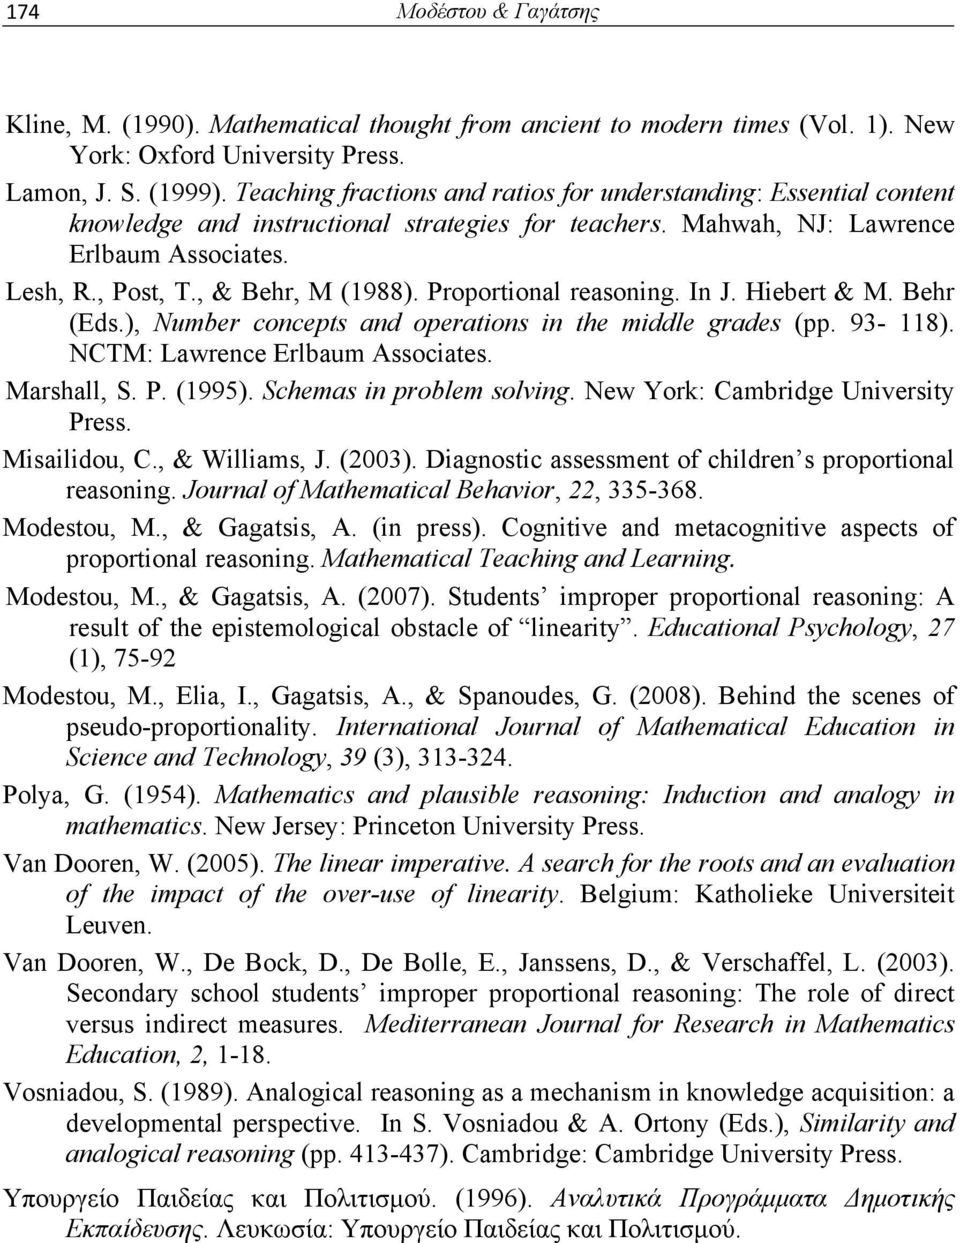 Proportional reasoning. In J. Hiebert & M. Behr (Eds.), Number concepts and operations in the middle grades (pp. 93-118). NCTM: Lawrence Erlbaum Associates. Marshall, S. P. (1995).